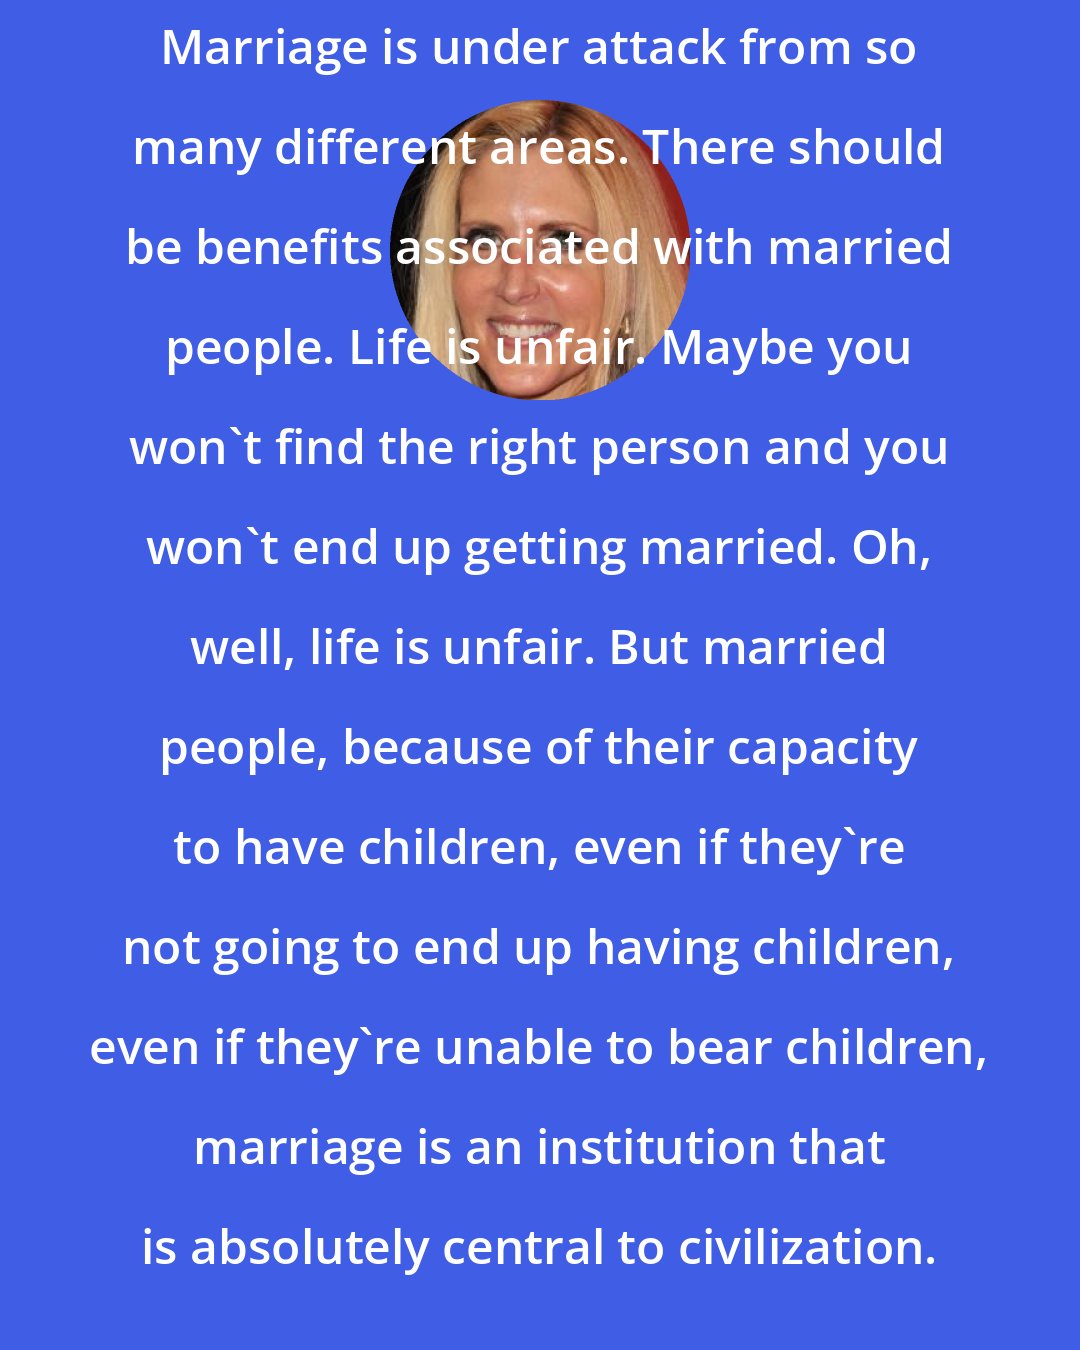 Ann Coulter: Marriage is under attack from so many different areas. There should be benefits associated with married people. Life is unfair. Maybe you won't find the right person and you won't end up getting married. Oh, well, life is unfair. But married people, because of their capacity to have children, even if they're not going to end up having children, even if they're unable to bear children, marriage is an institution that is absolutely central to civilization.